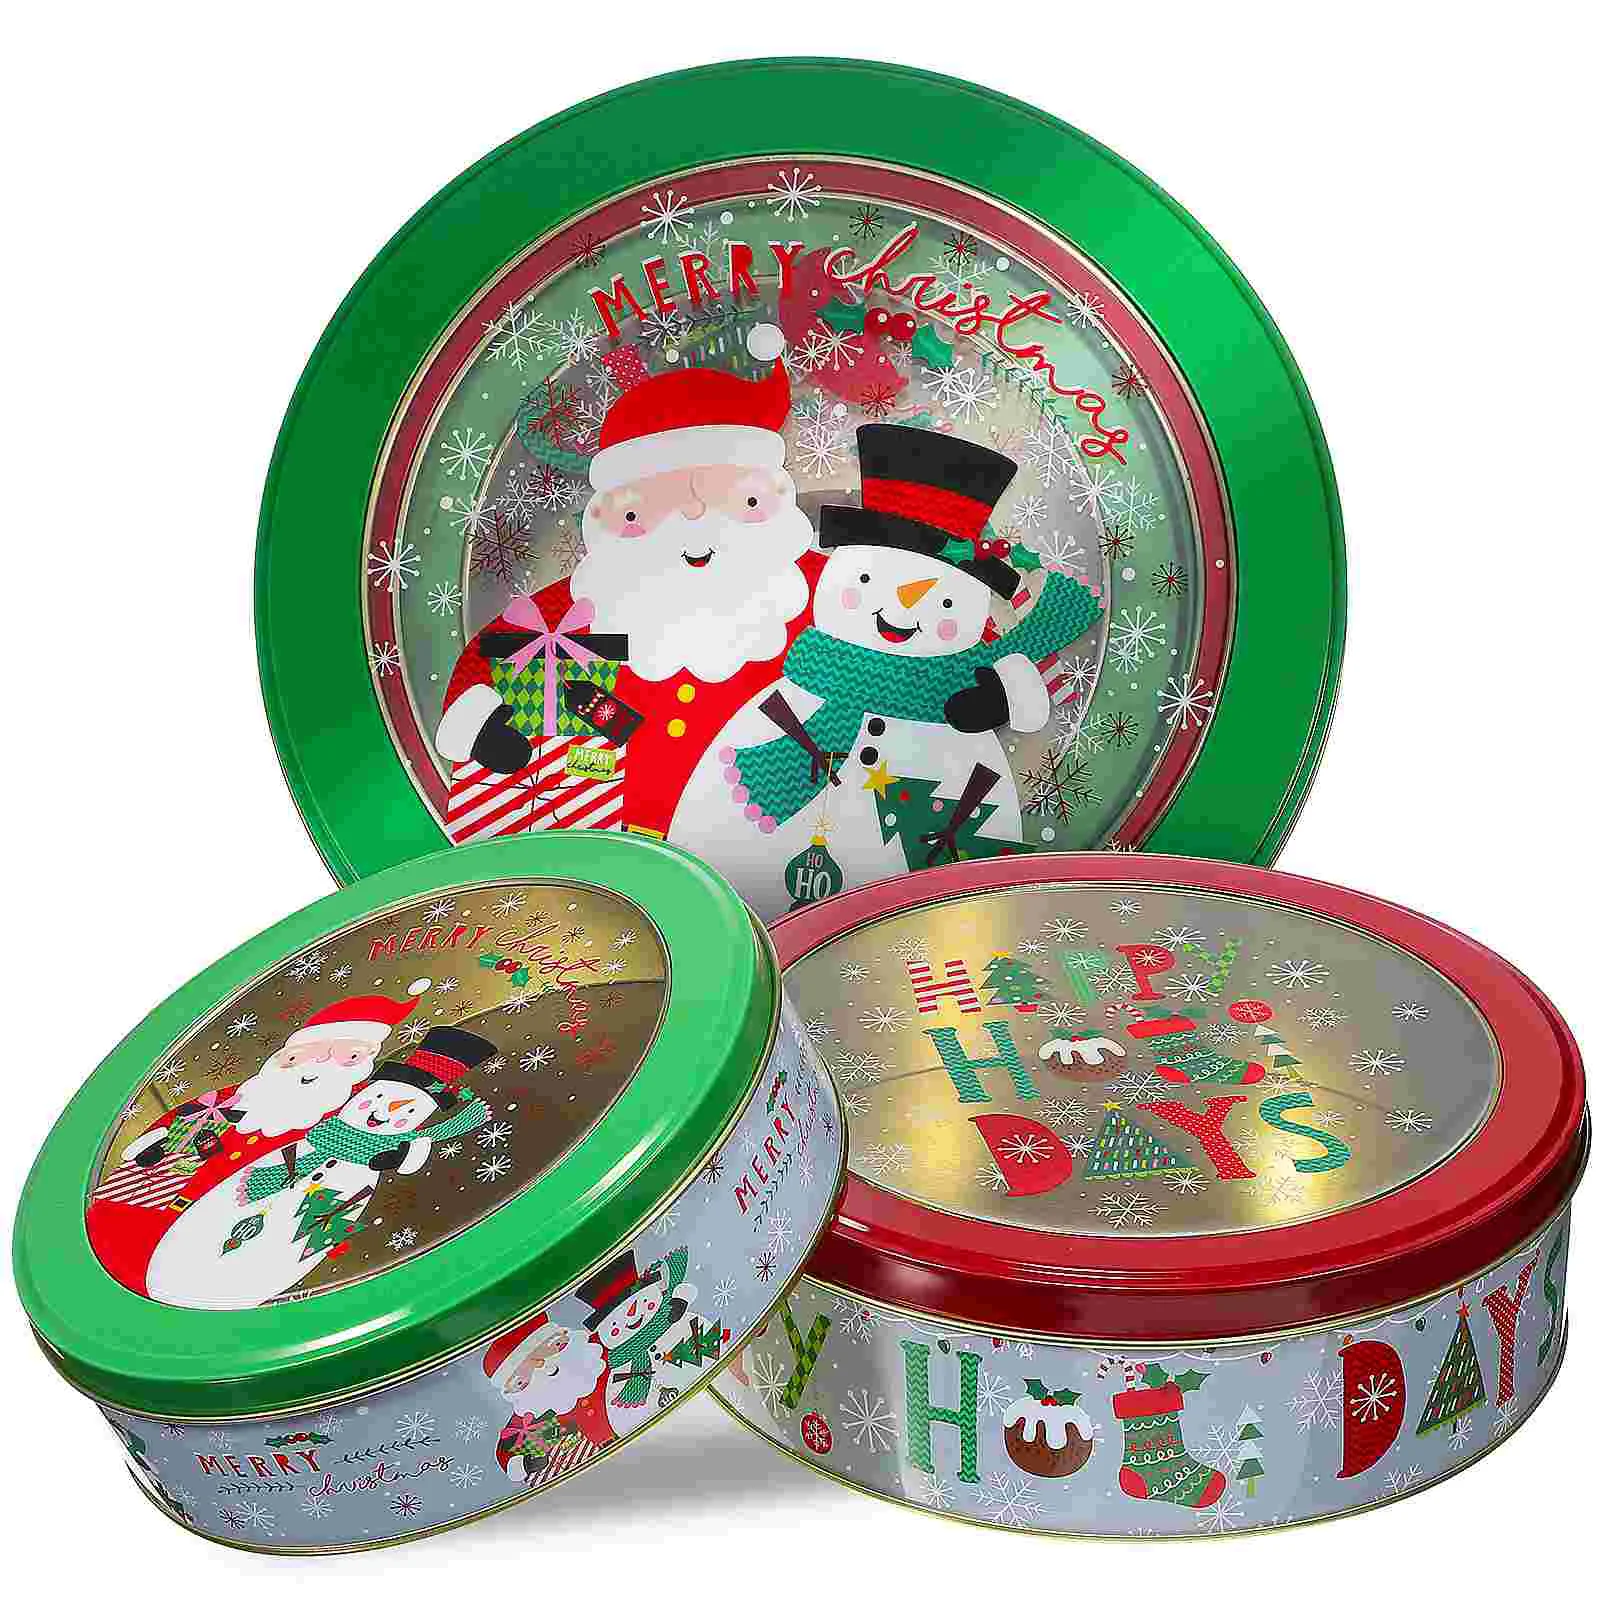 

3 Pcs Christmas Cookie Tins Gift Jar Large Lids Containers Tinplate Party Giving